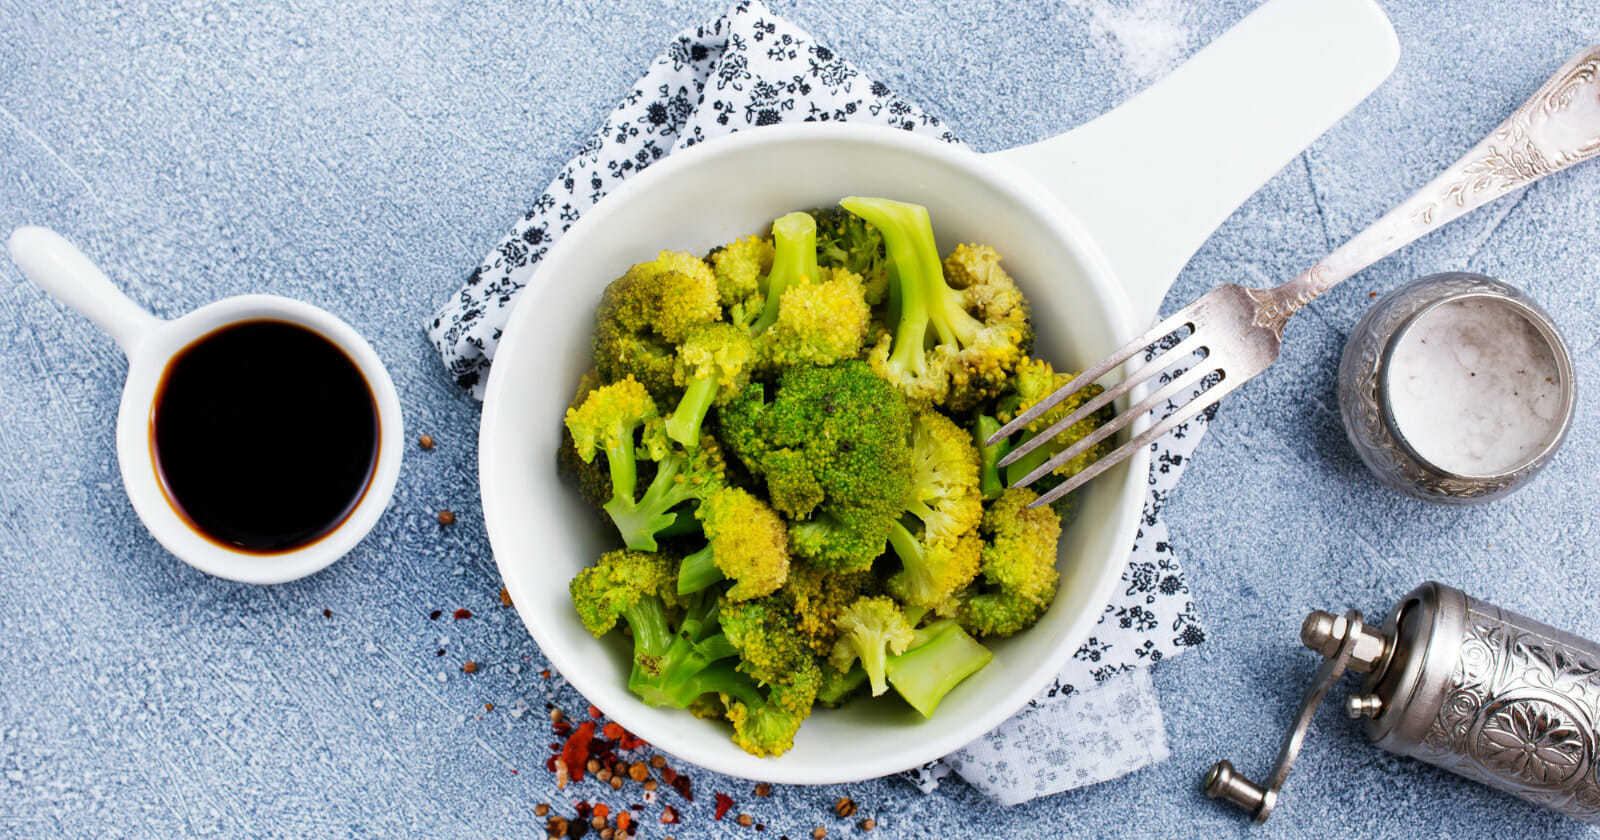 Bowl of broccoli which is food that contains spermidine 